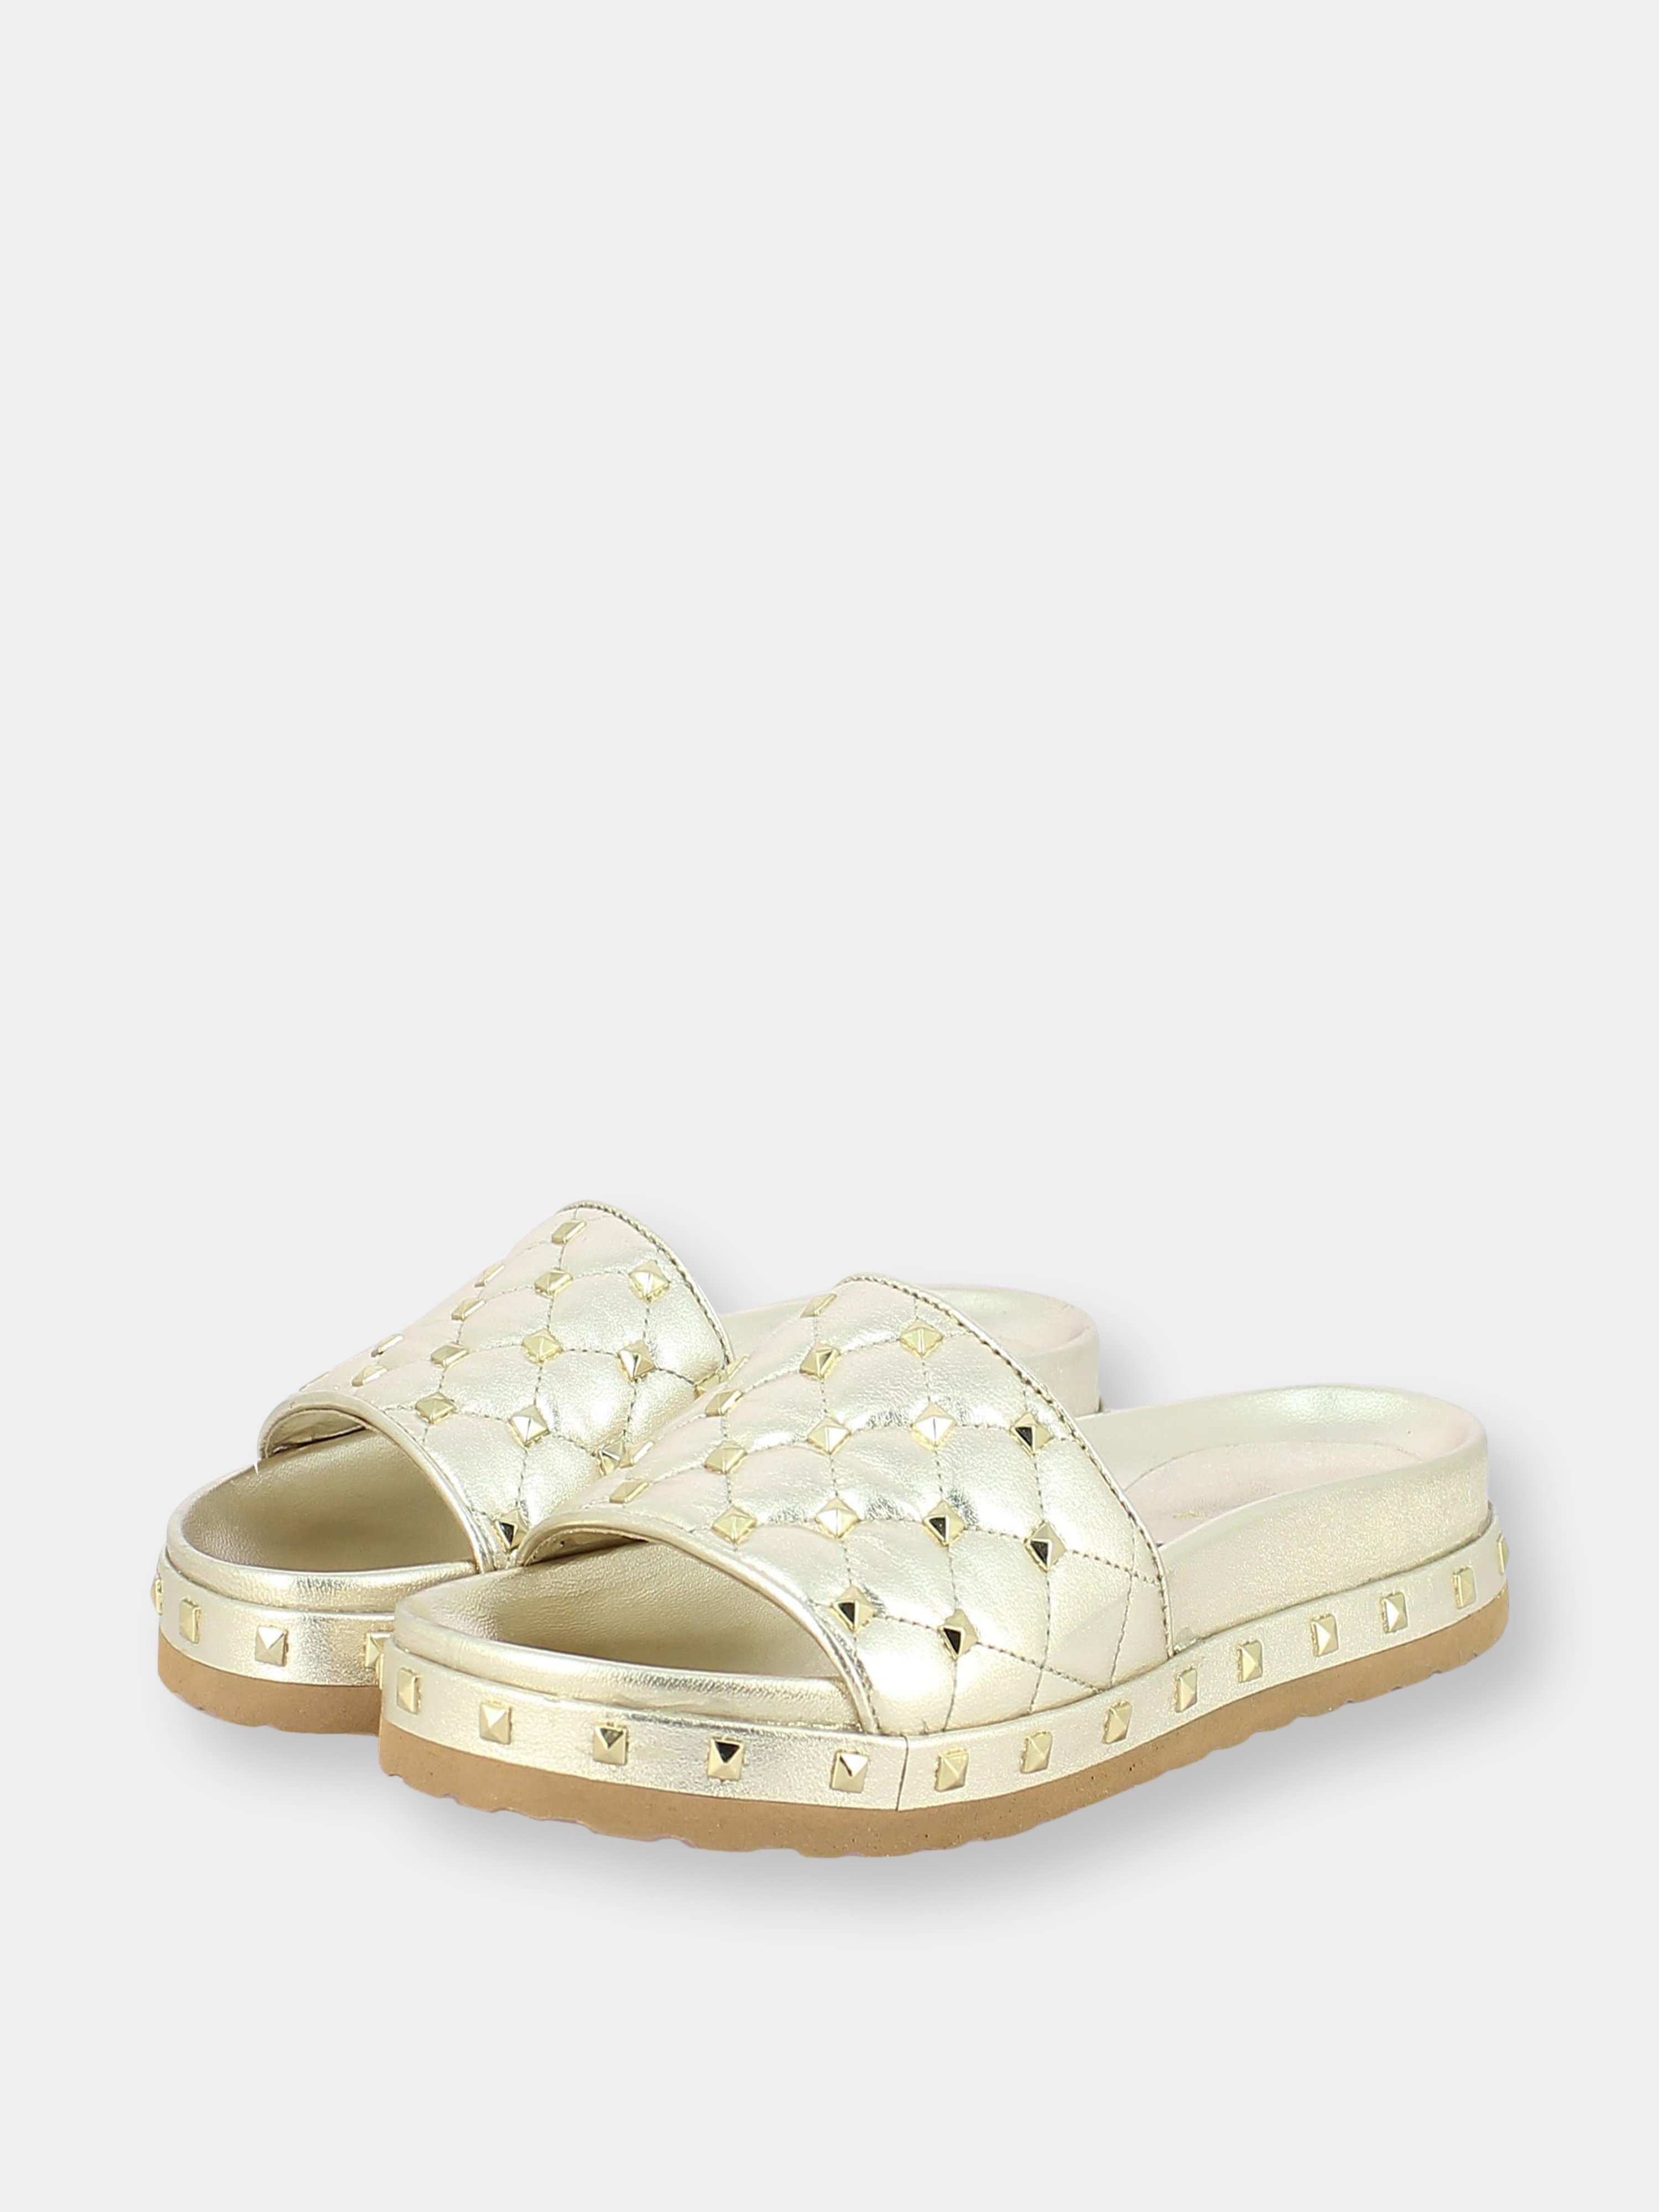 Saint G Gina Studded Mule In Gold